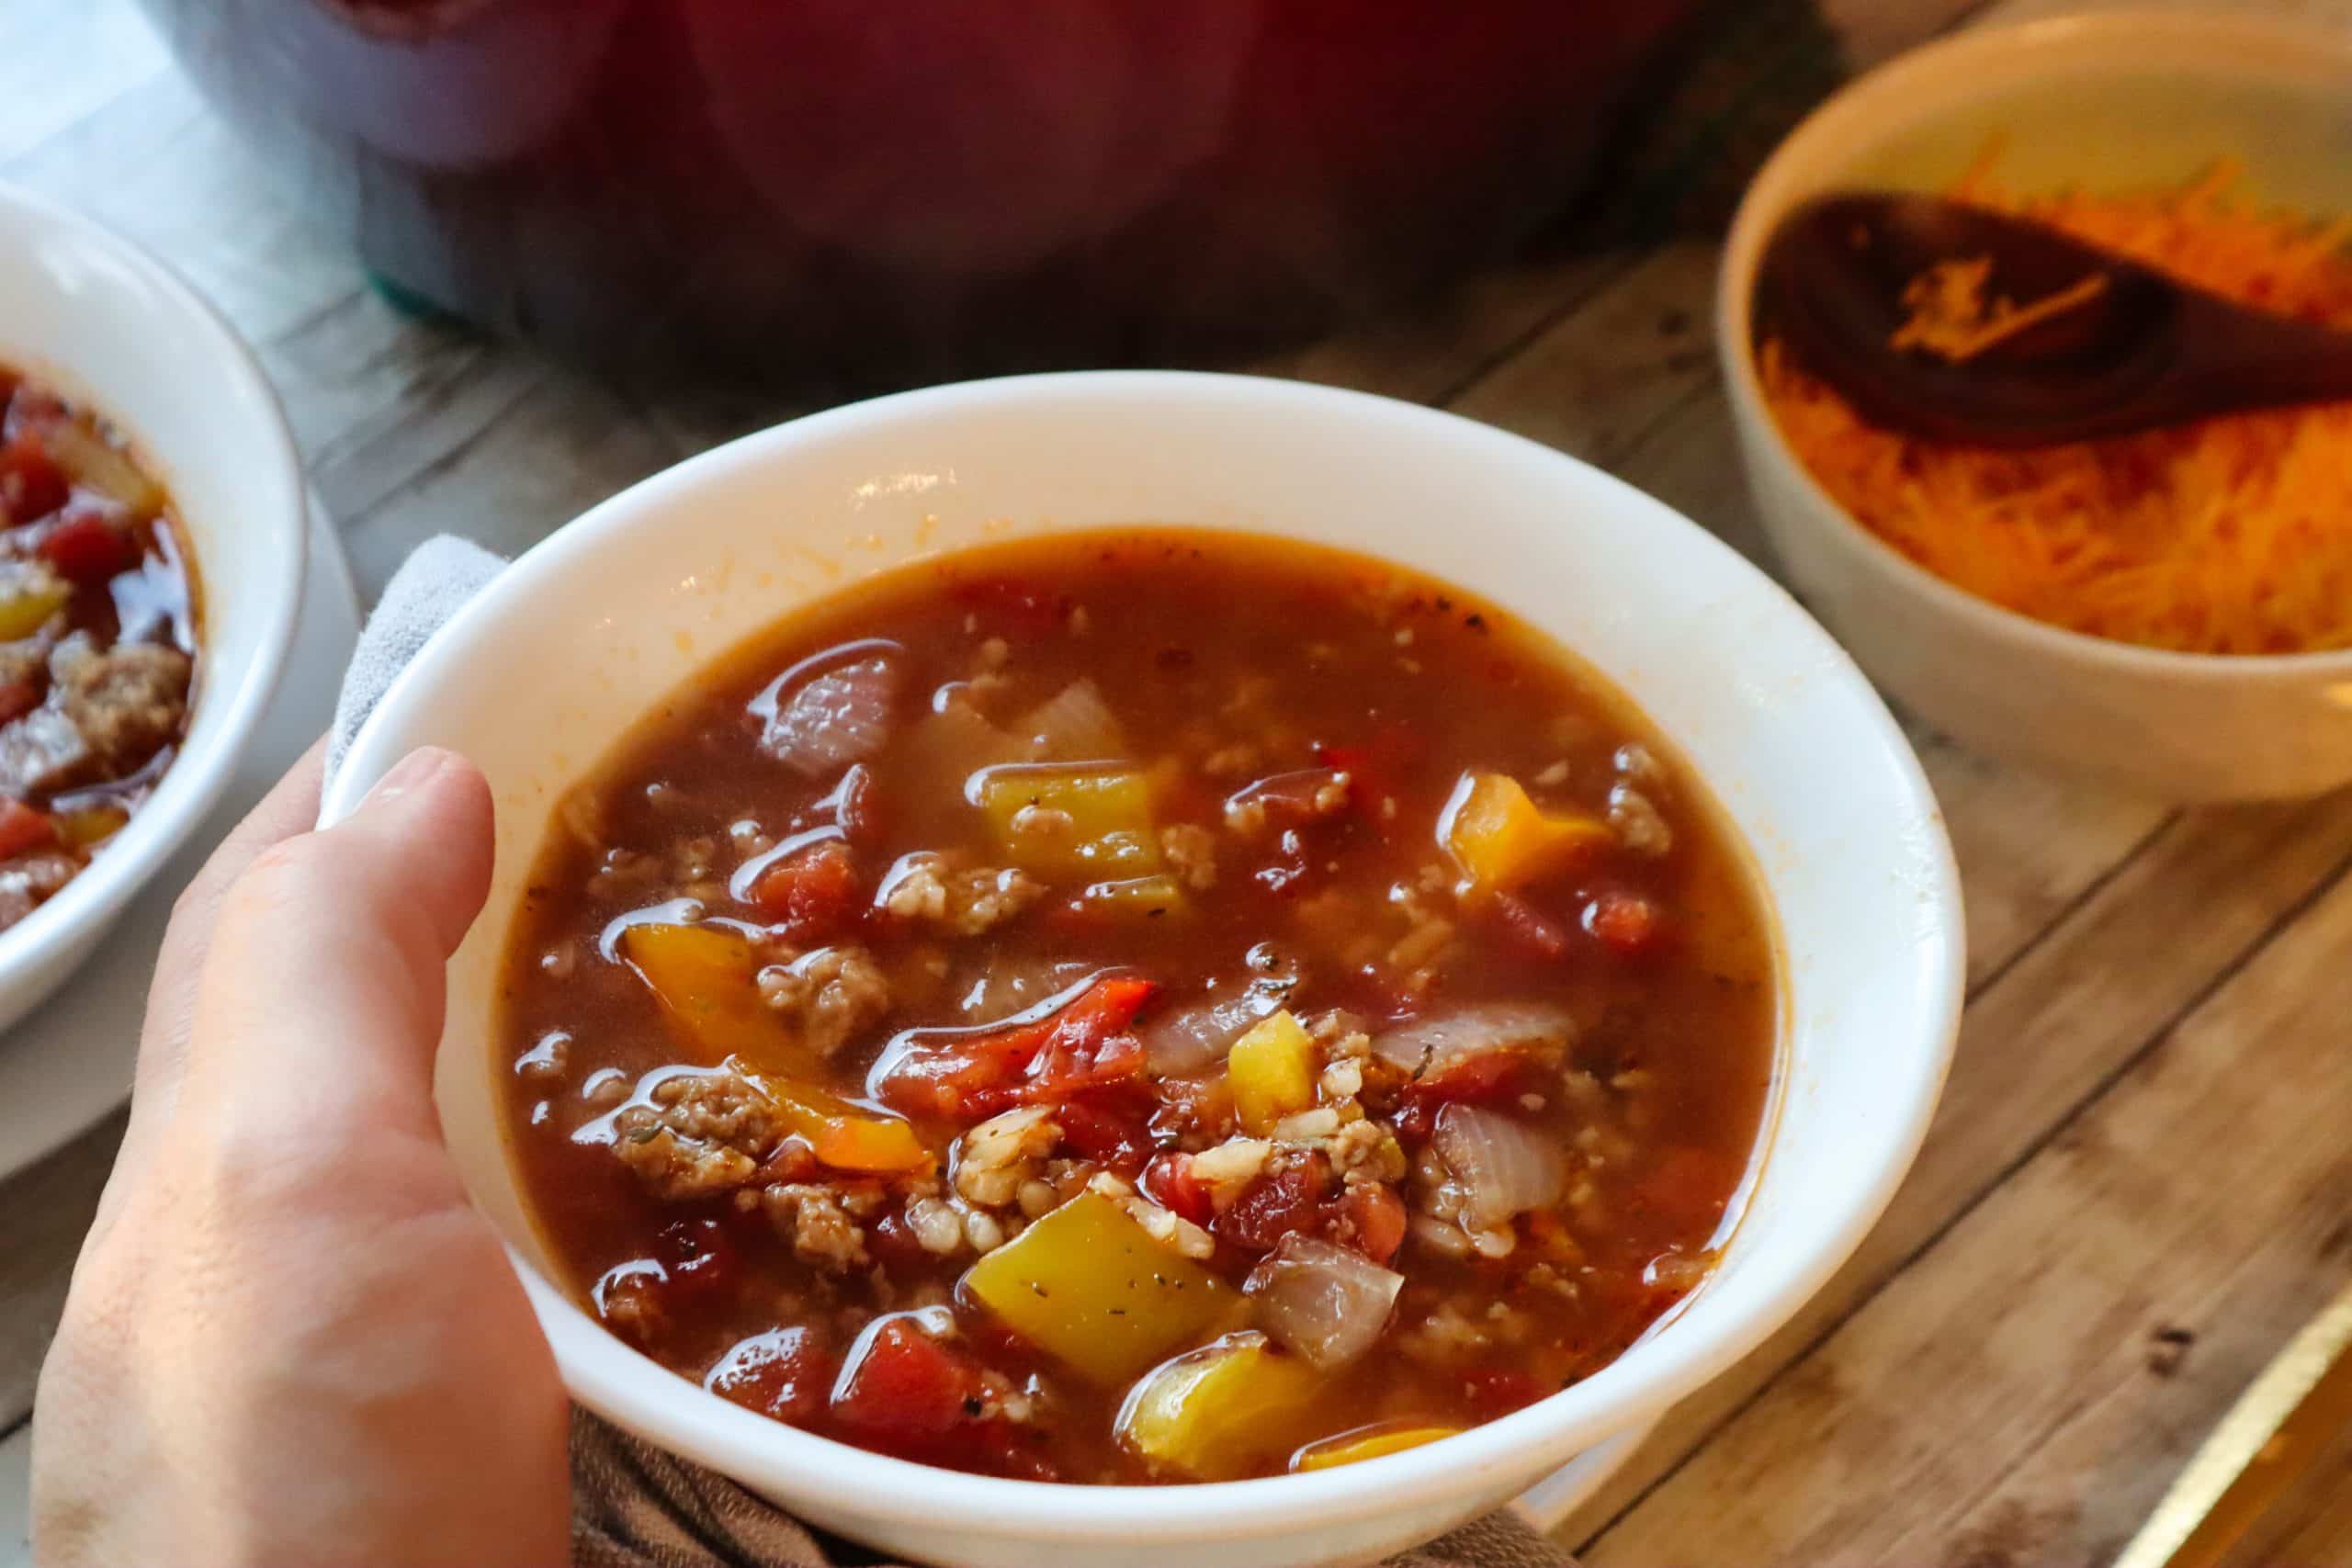 A bowl full of steaming Unstuffed Pepper Soup